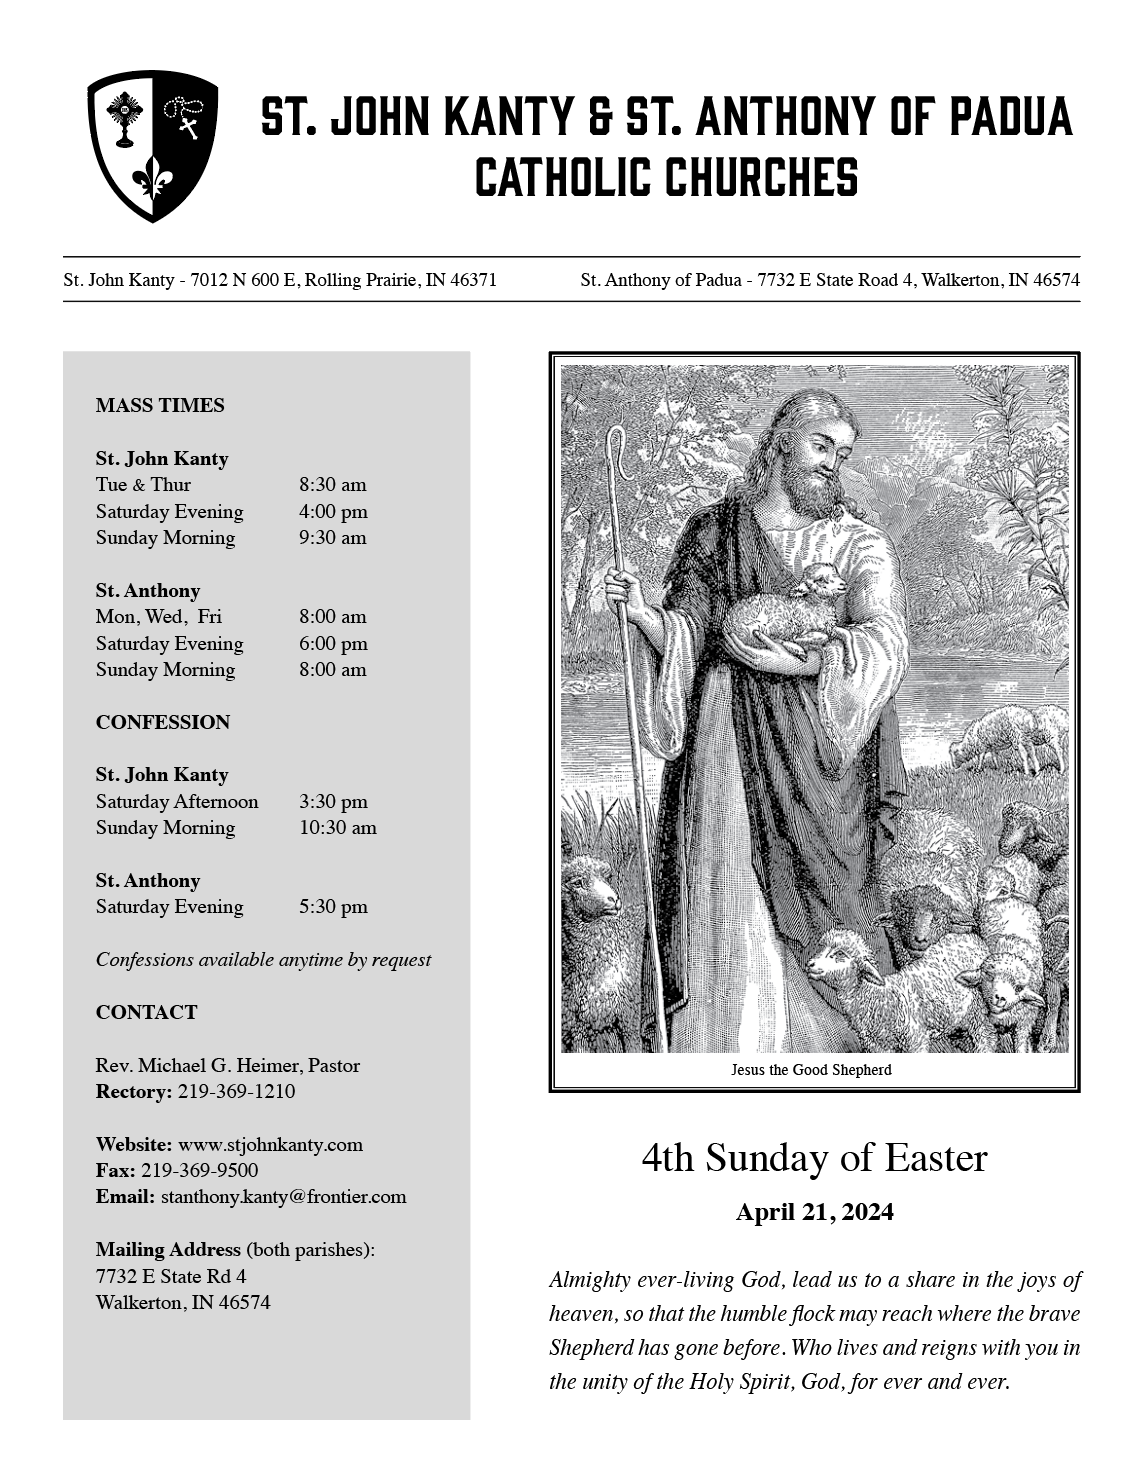 2024 4th Sunday of Easter Bulletin